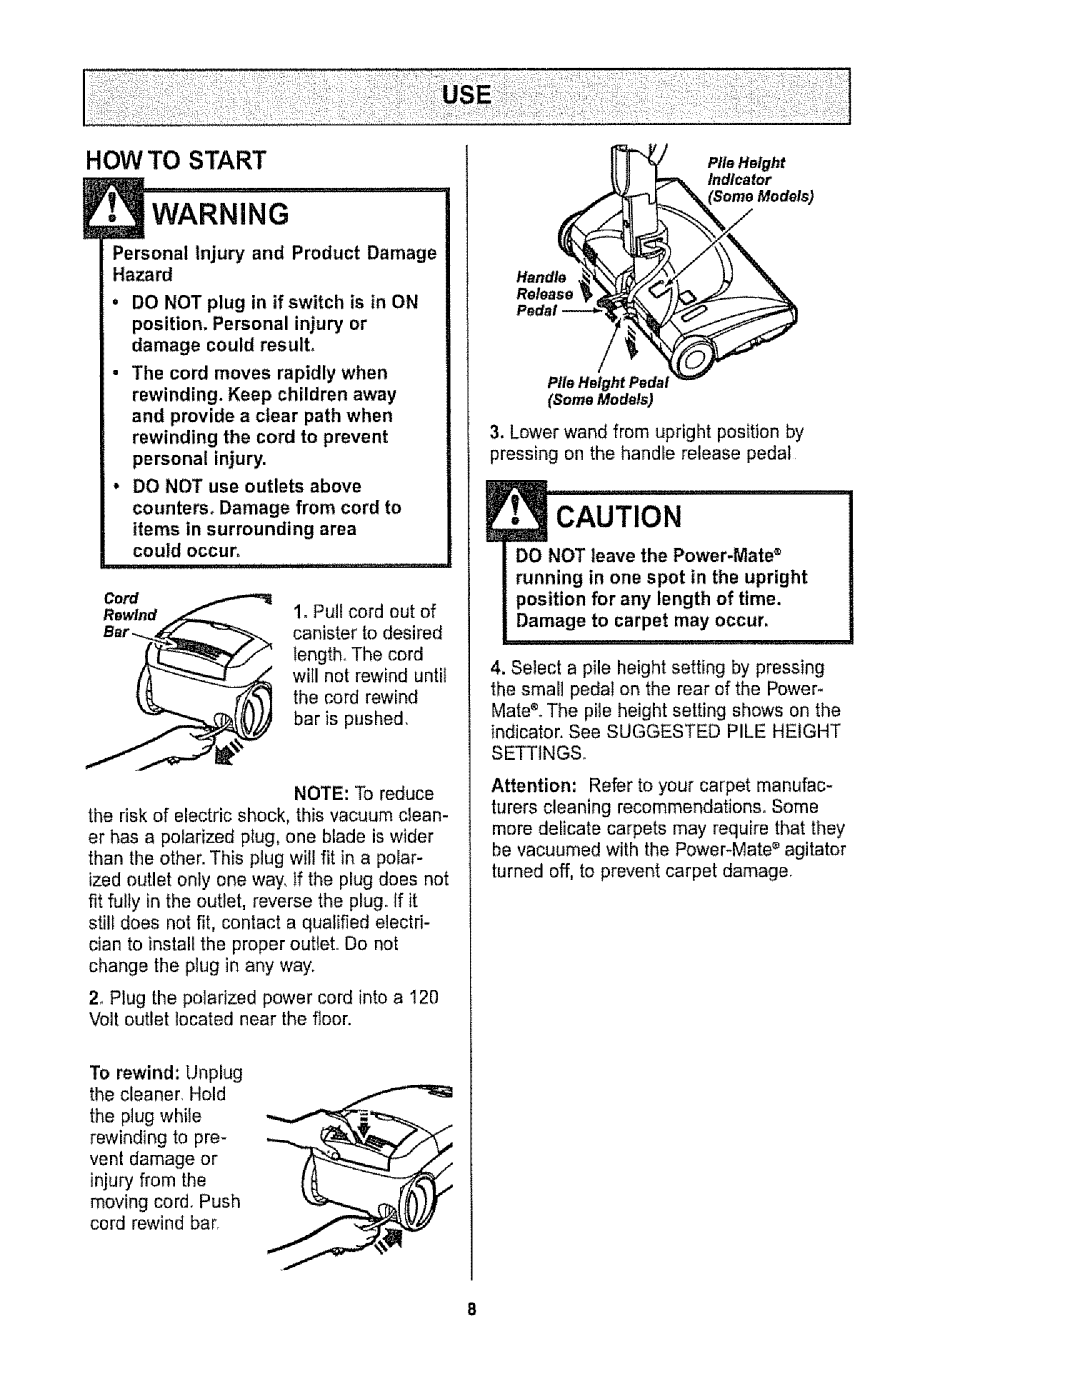 Kenmore 116.29912 owner manual E• Caution, How To Start, Personal Injury and Product Damage Hazard 